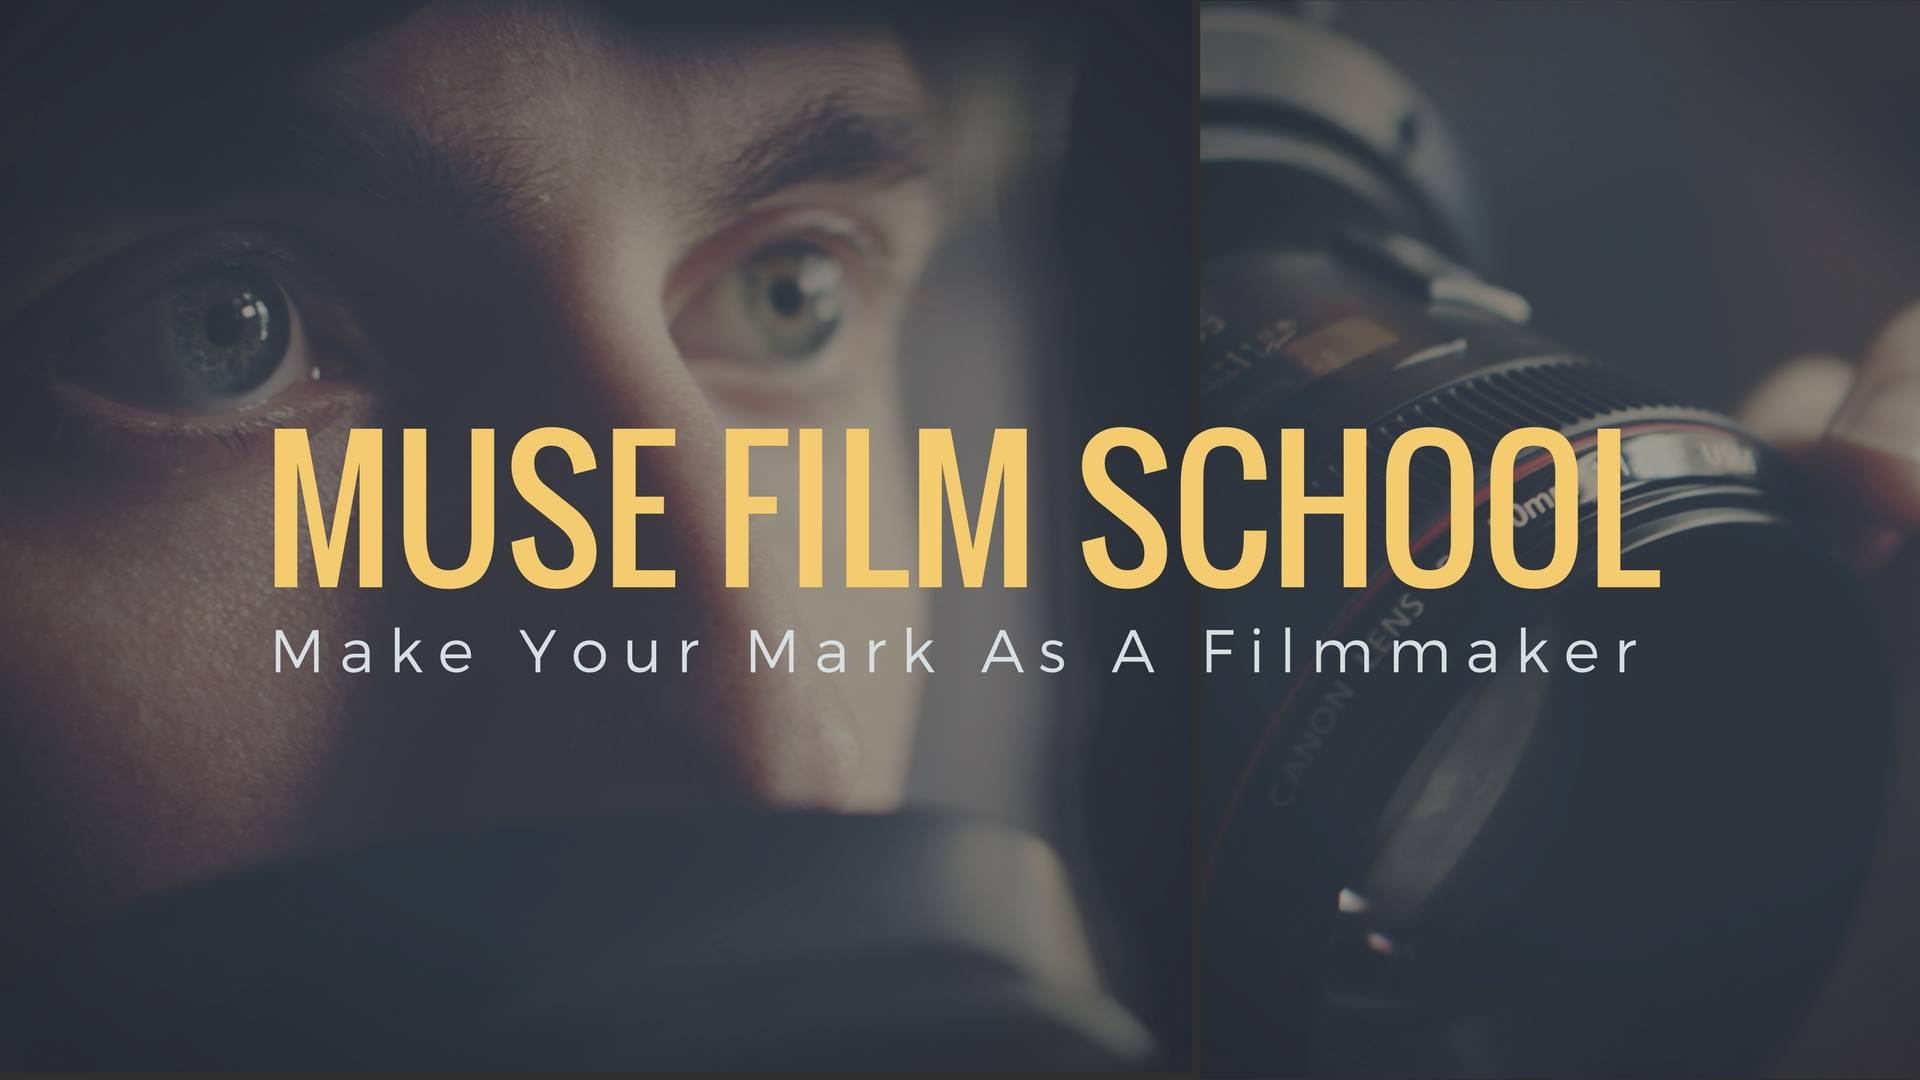 Muse Film School from the creators of Muse Story Telling